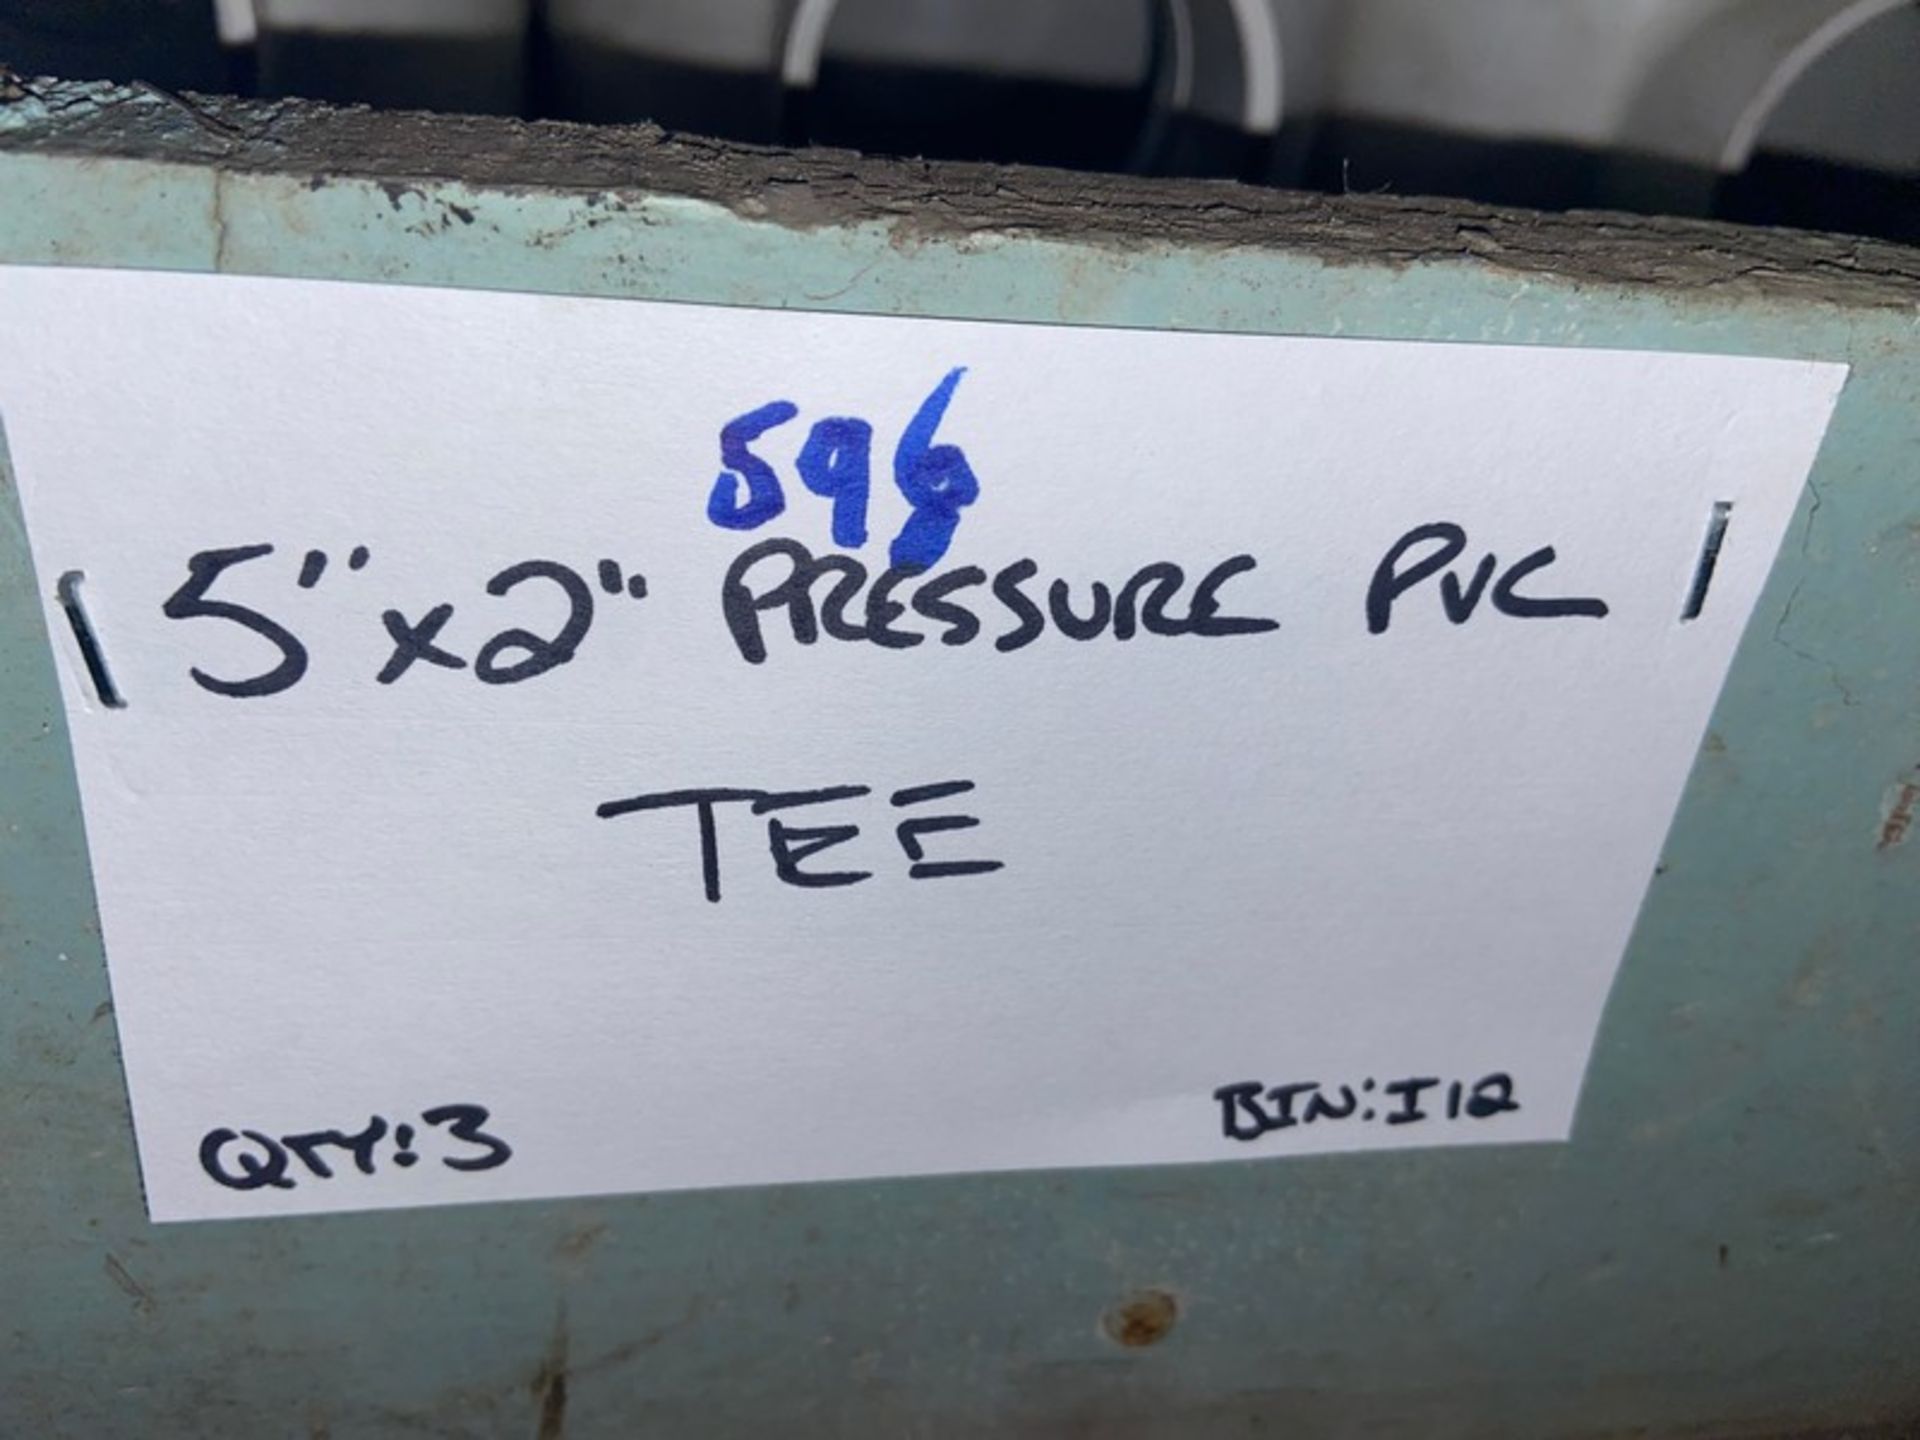 (3) 5” x 2" Pressure PVC Tee (Bin:I12)(LOCATED IN MONROEVILLE, PA) - Image 2 of 2